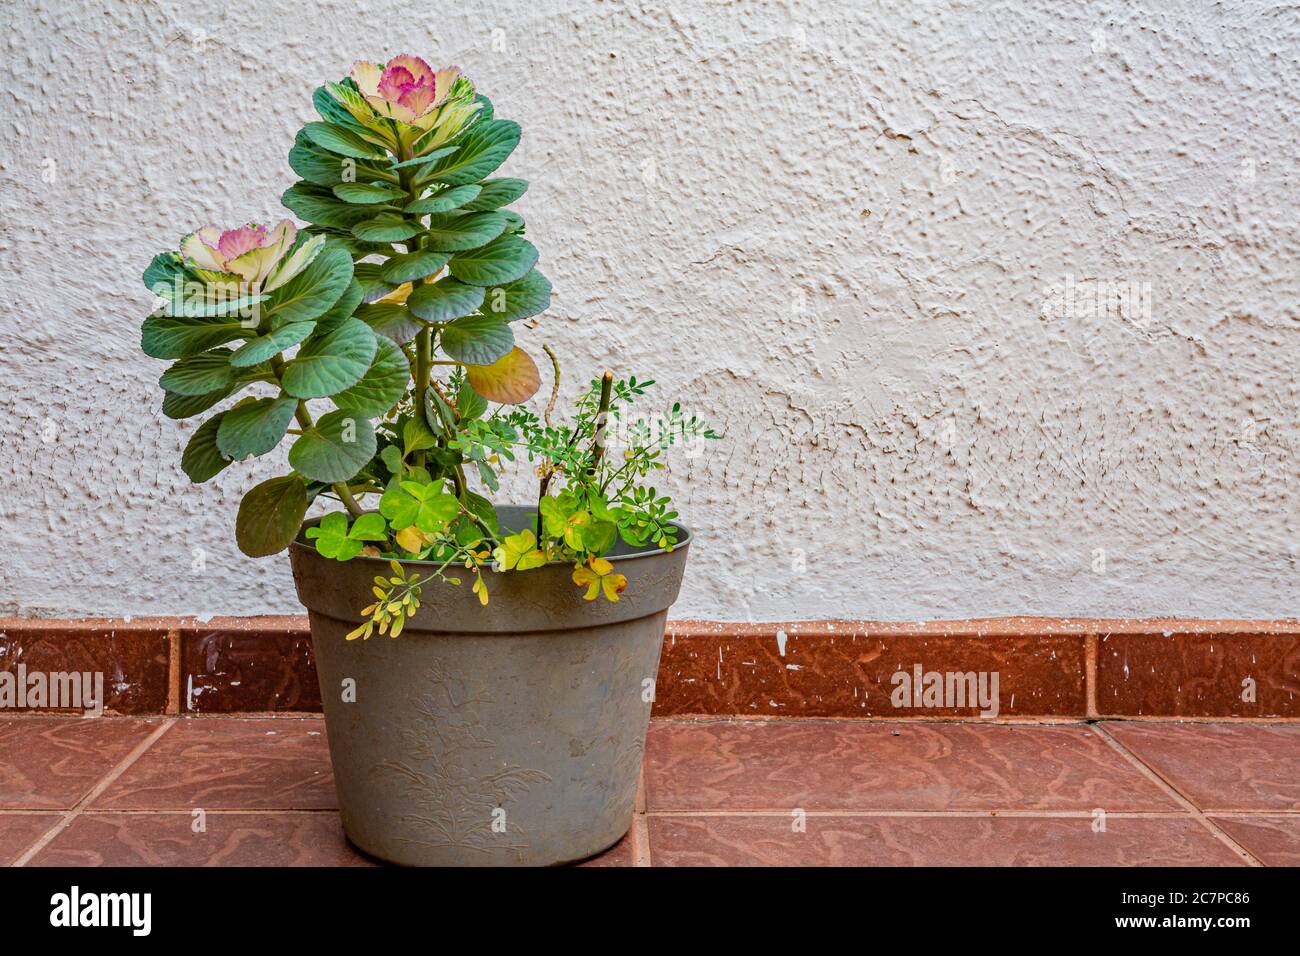 Plastic pot with an exotic plant with purple flowers and round green leaves along with wild clover plants on the brown floor and a white wall in the b Stock Photo